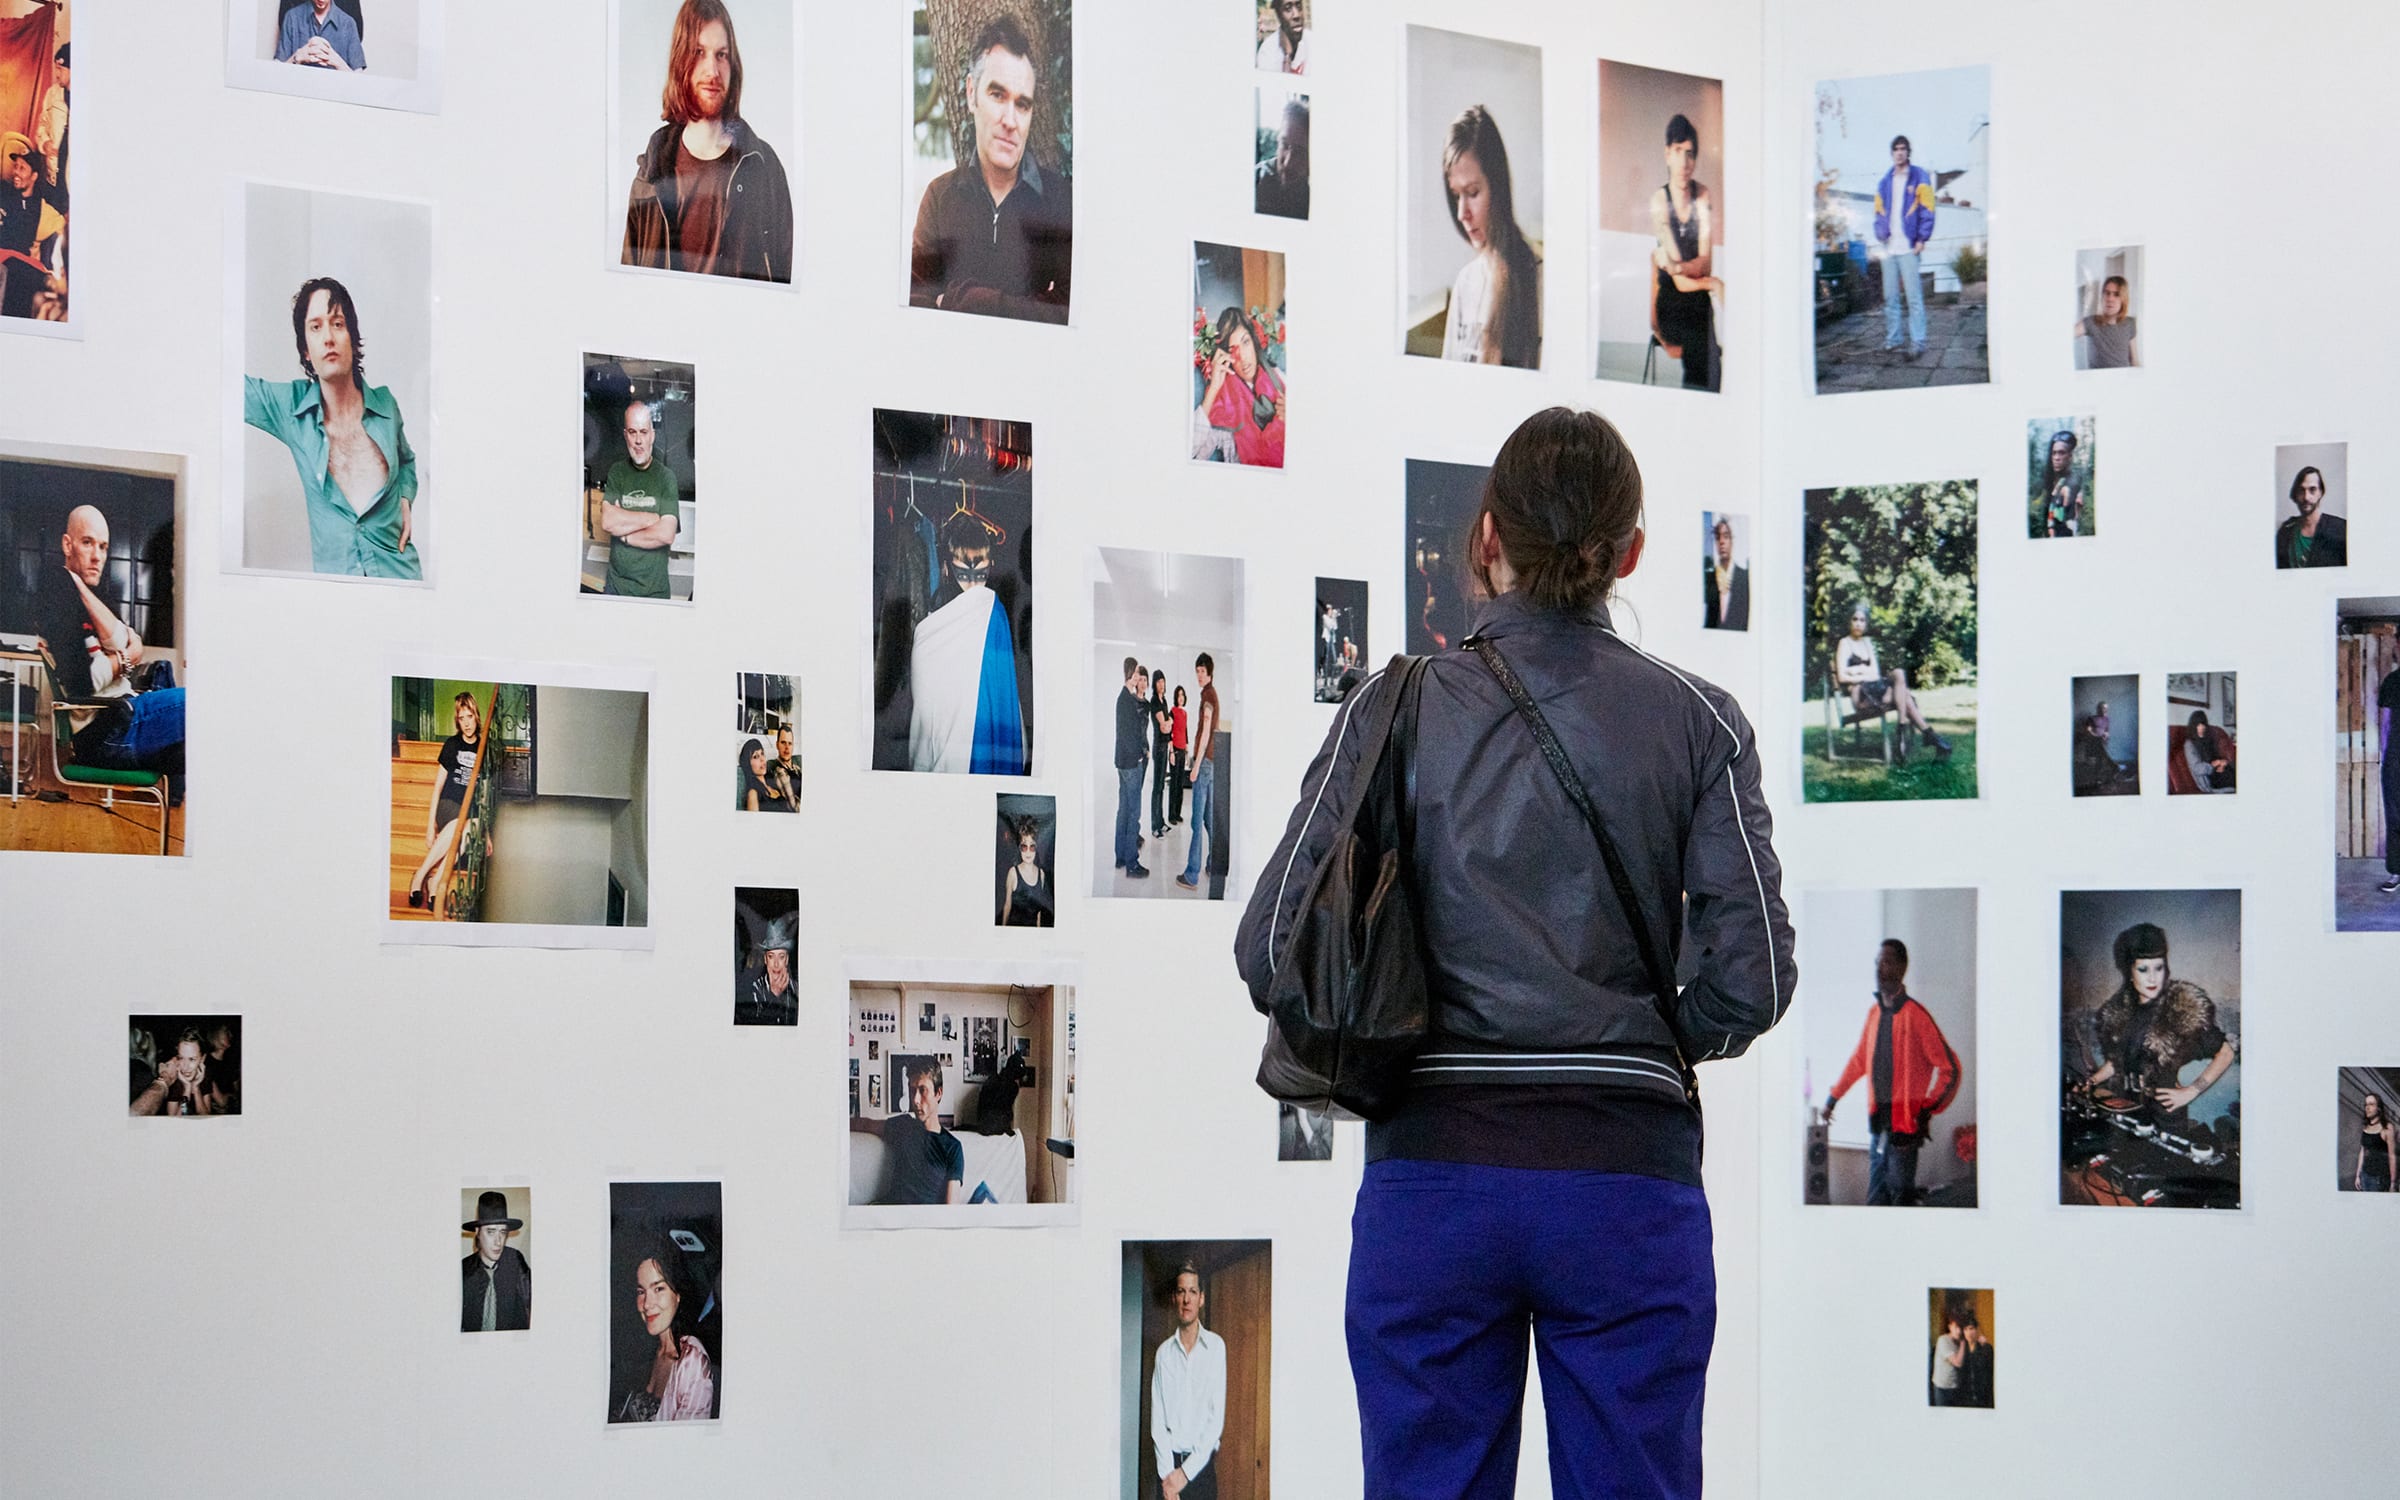 A visitor in front of works by Wolfgang Tillmans, presented by Galerie Buchholz at Art Basel's 2019 edition in Basel.